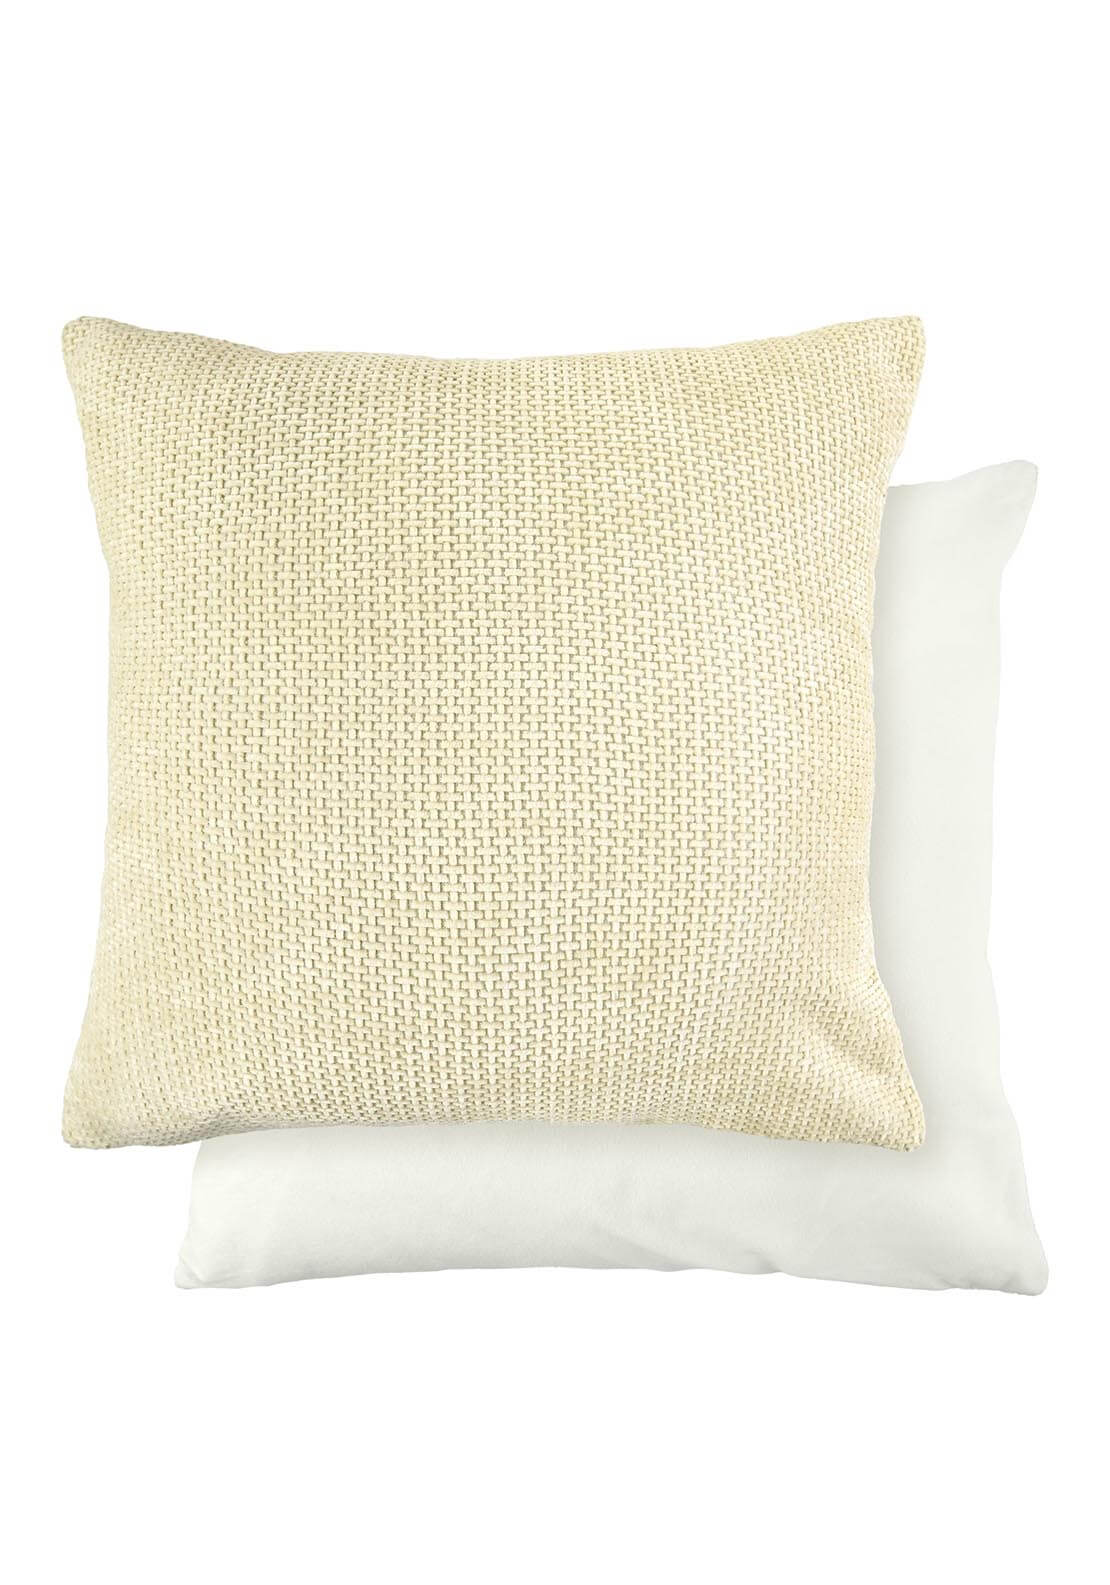 The Home Collection Portland Cushion 17&quot; x 17&quot; - Cream 2 Shaws Department Stores